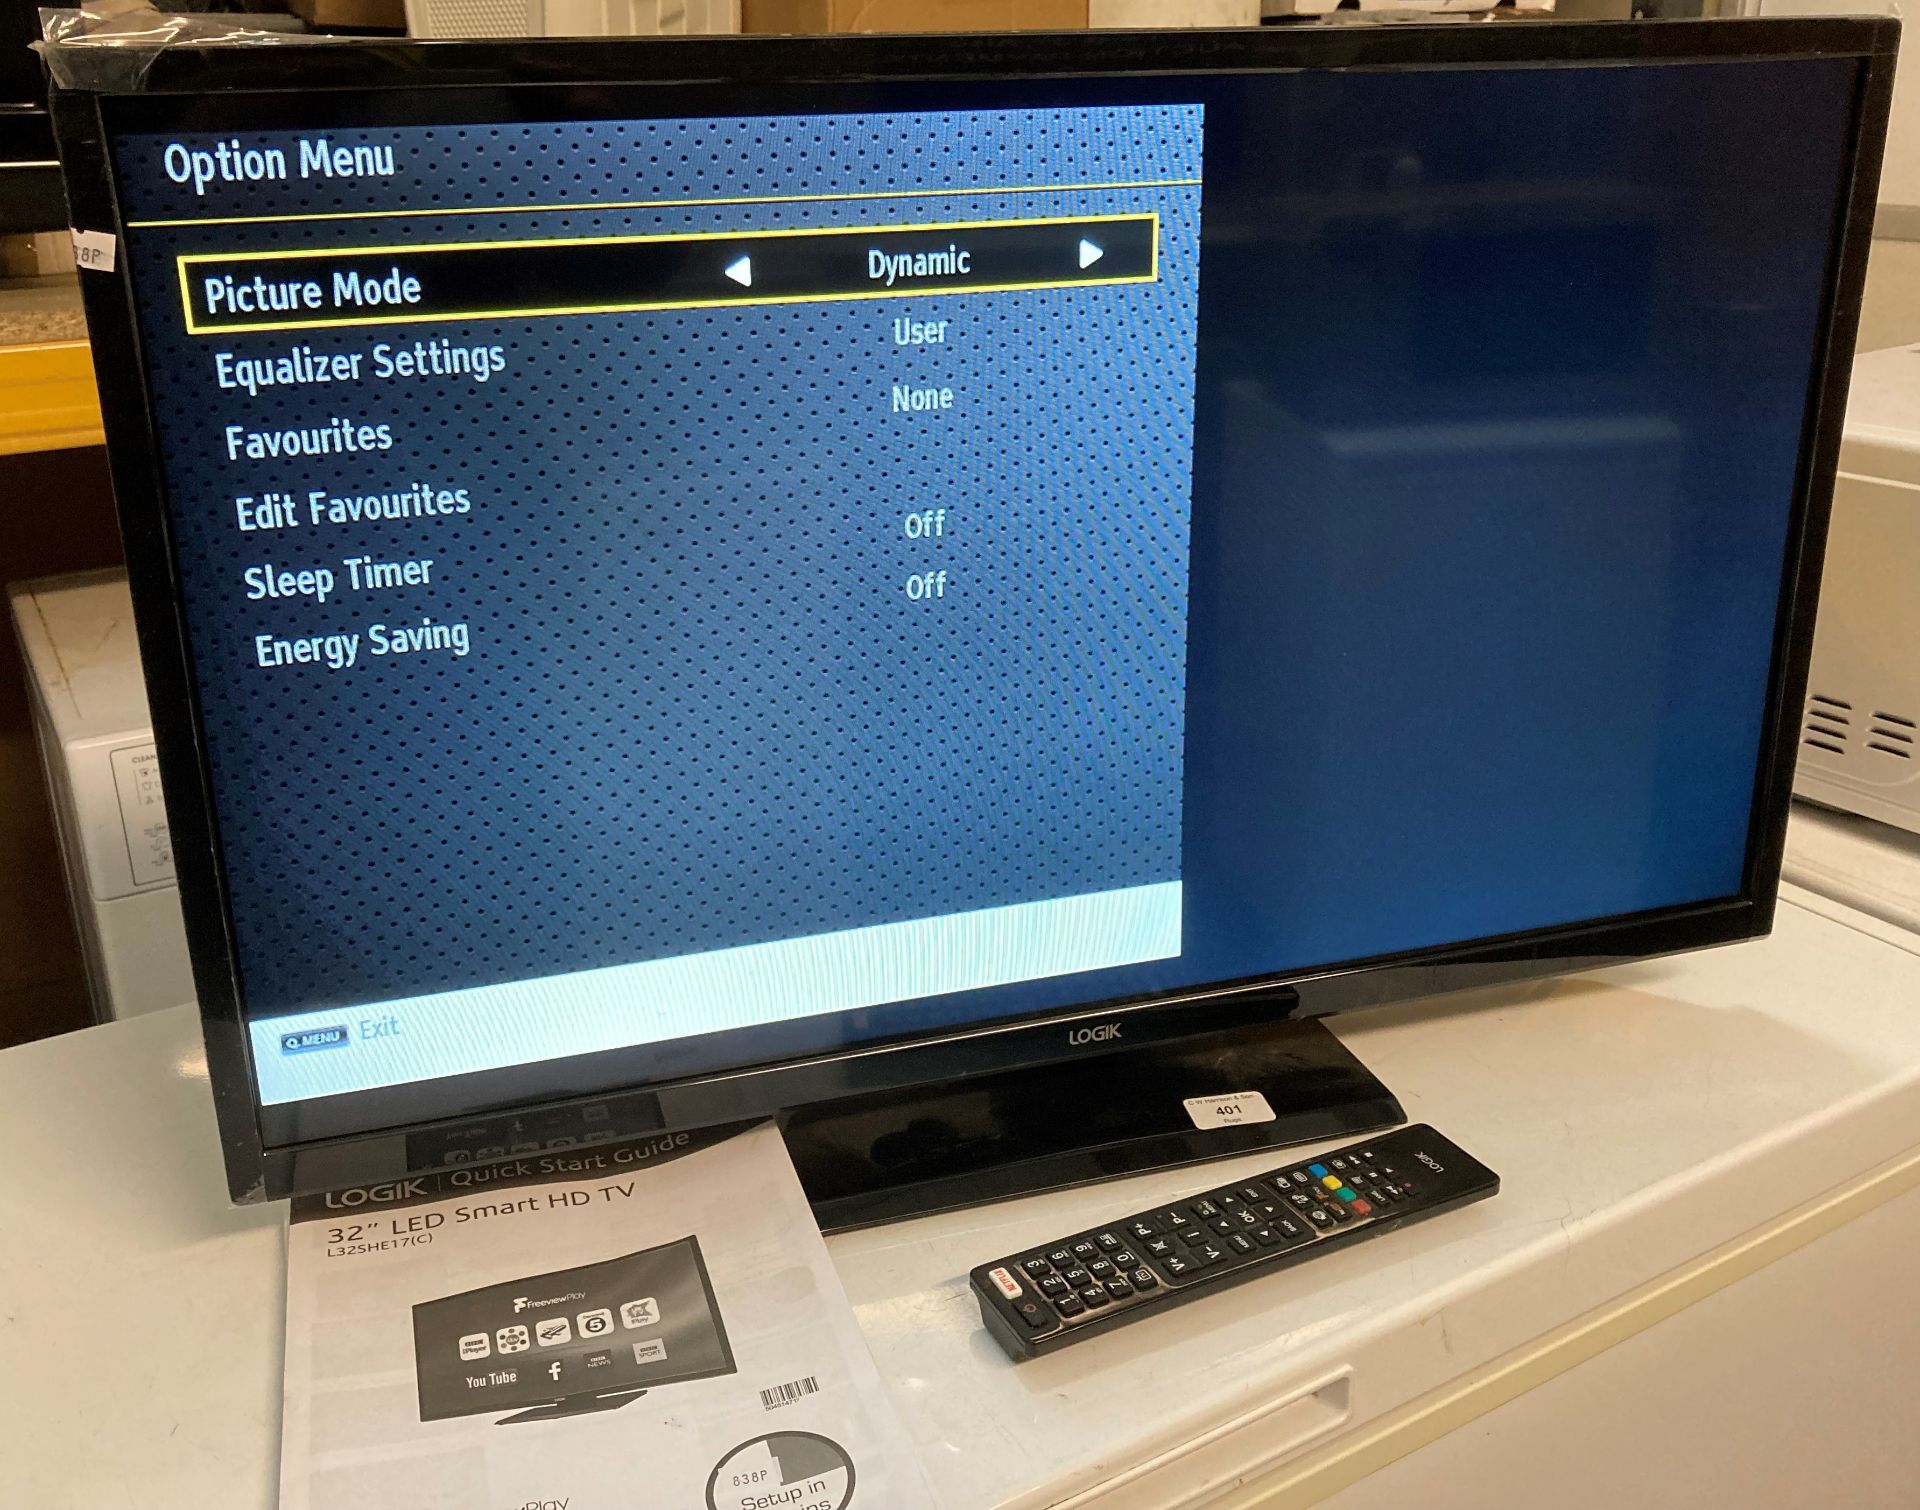 Logik 32" LED smart TV L323HE7C complete with remote (pay office)